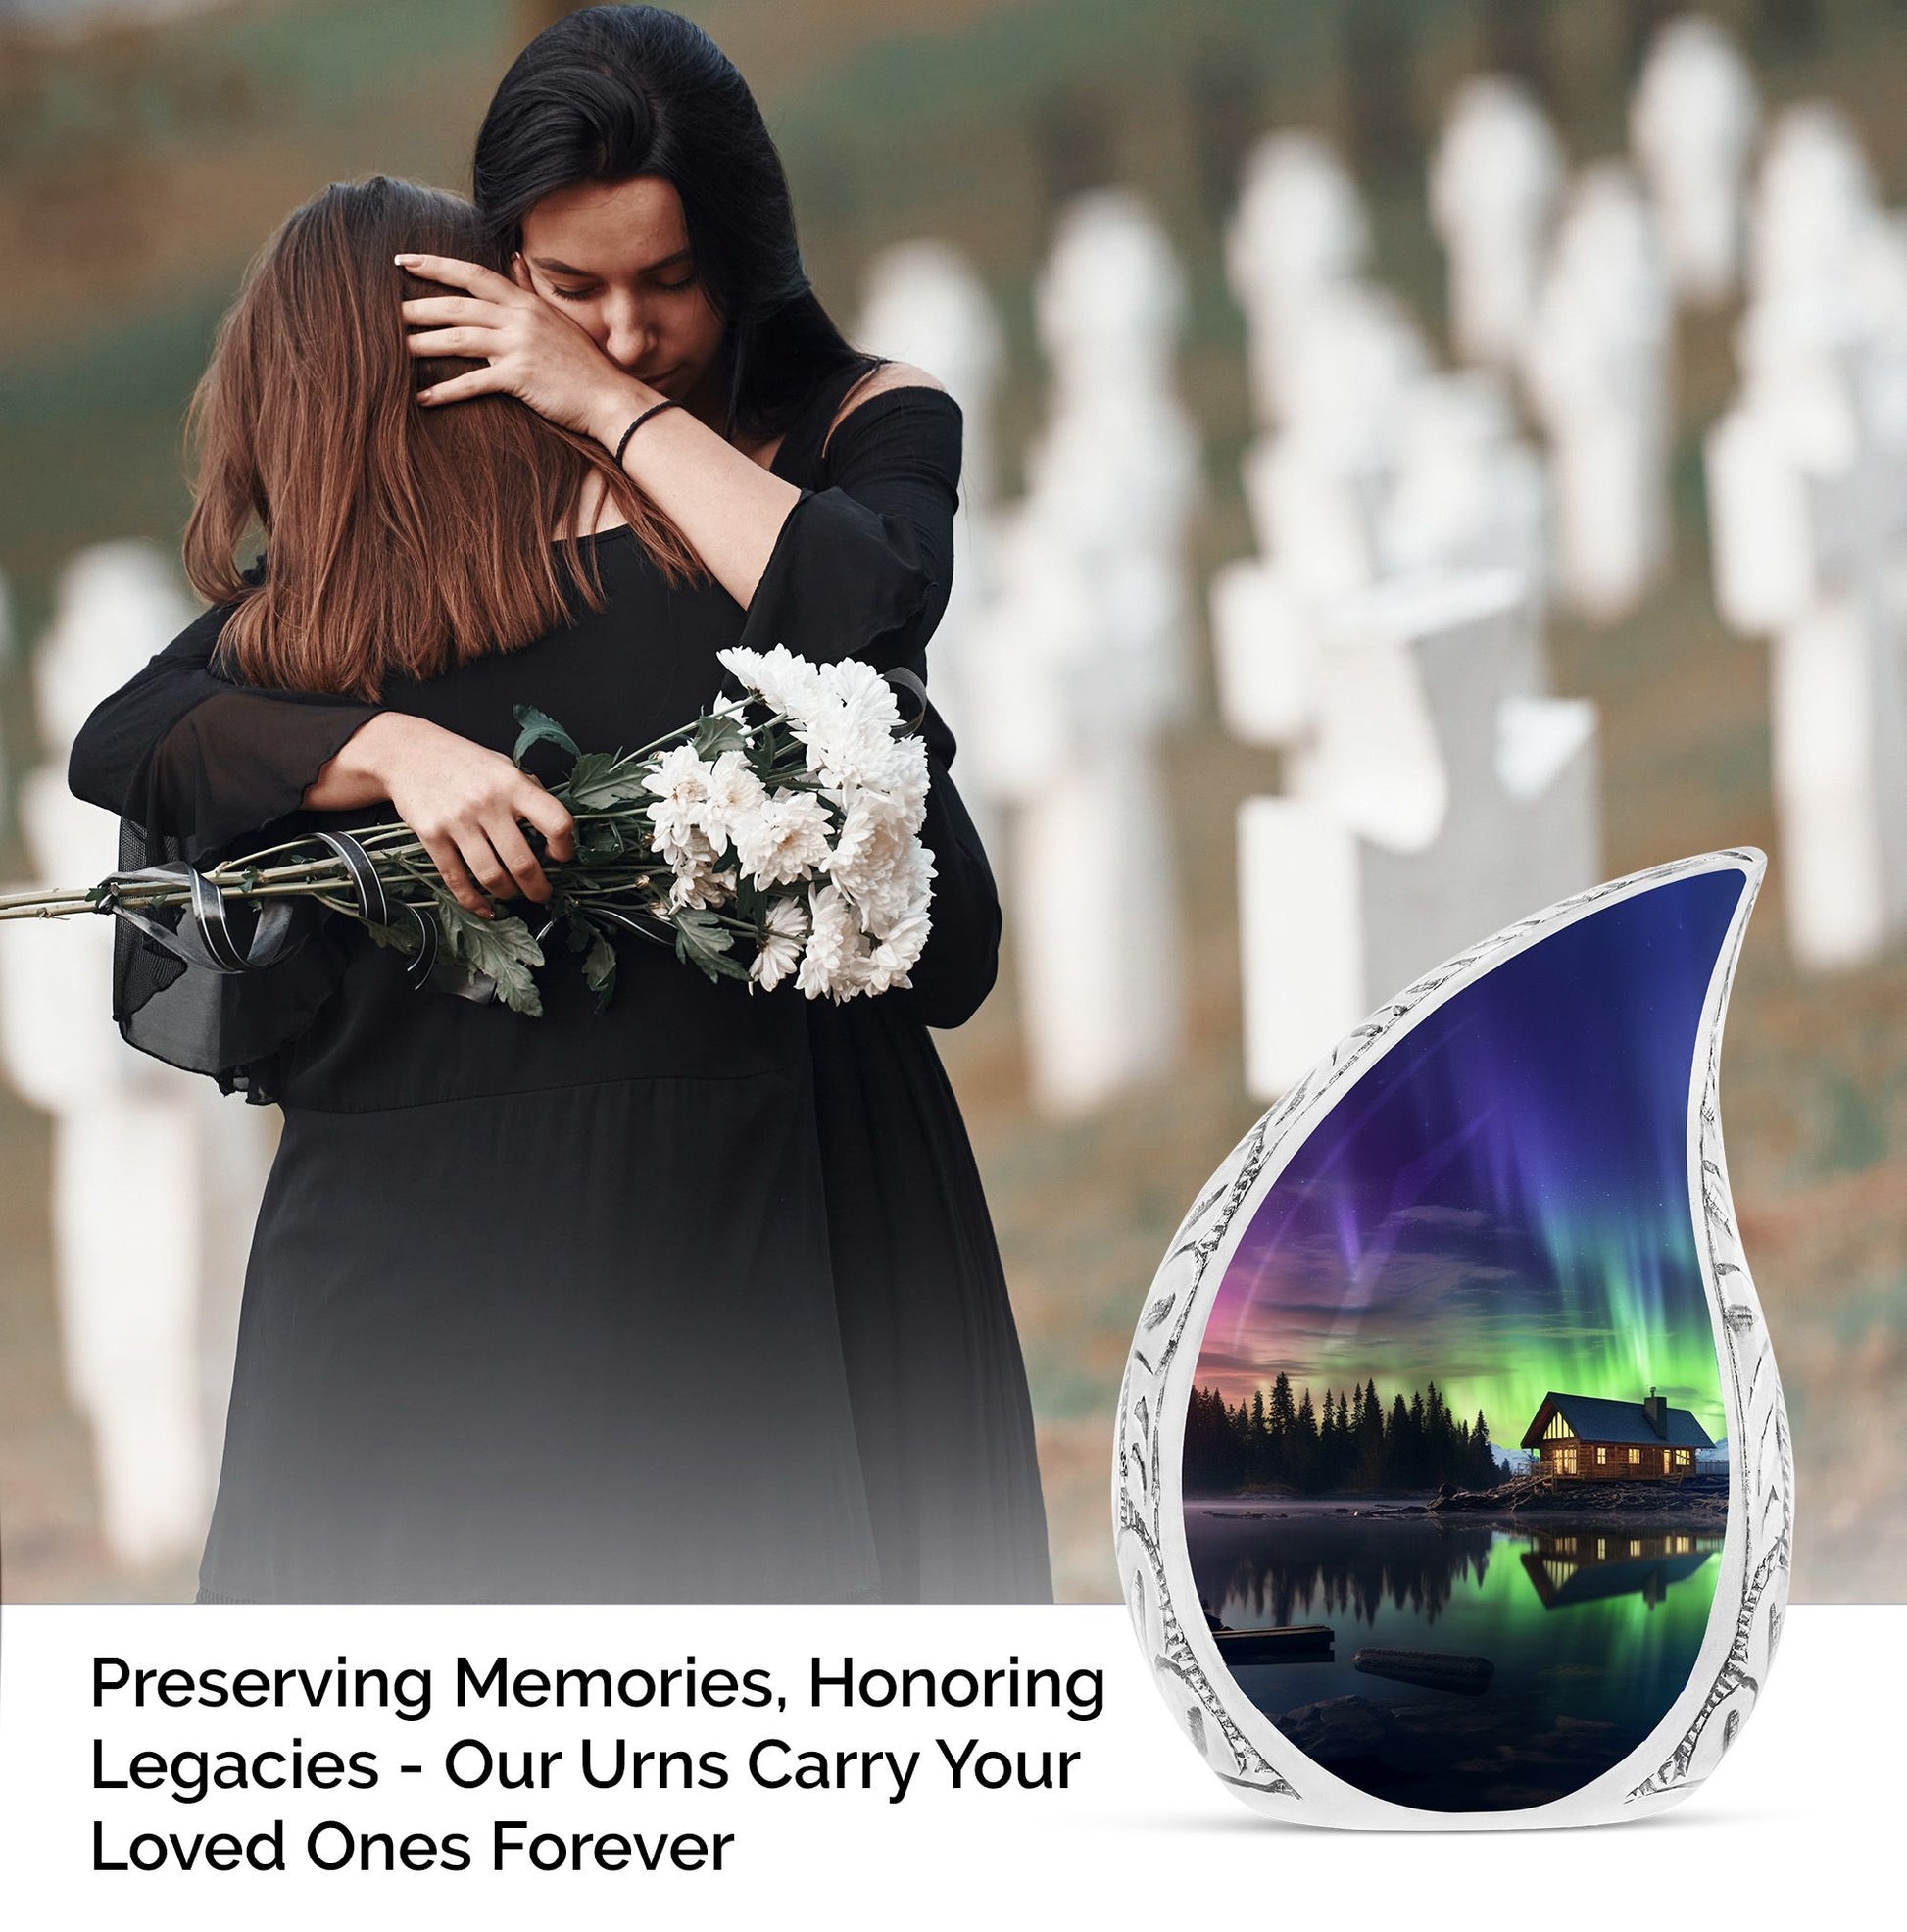 Unique large cremation urn with Aurora Borealis design, ideal metallic container for human ashes.